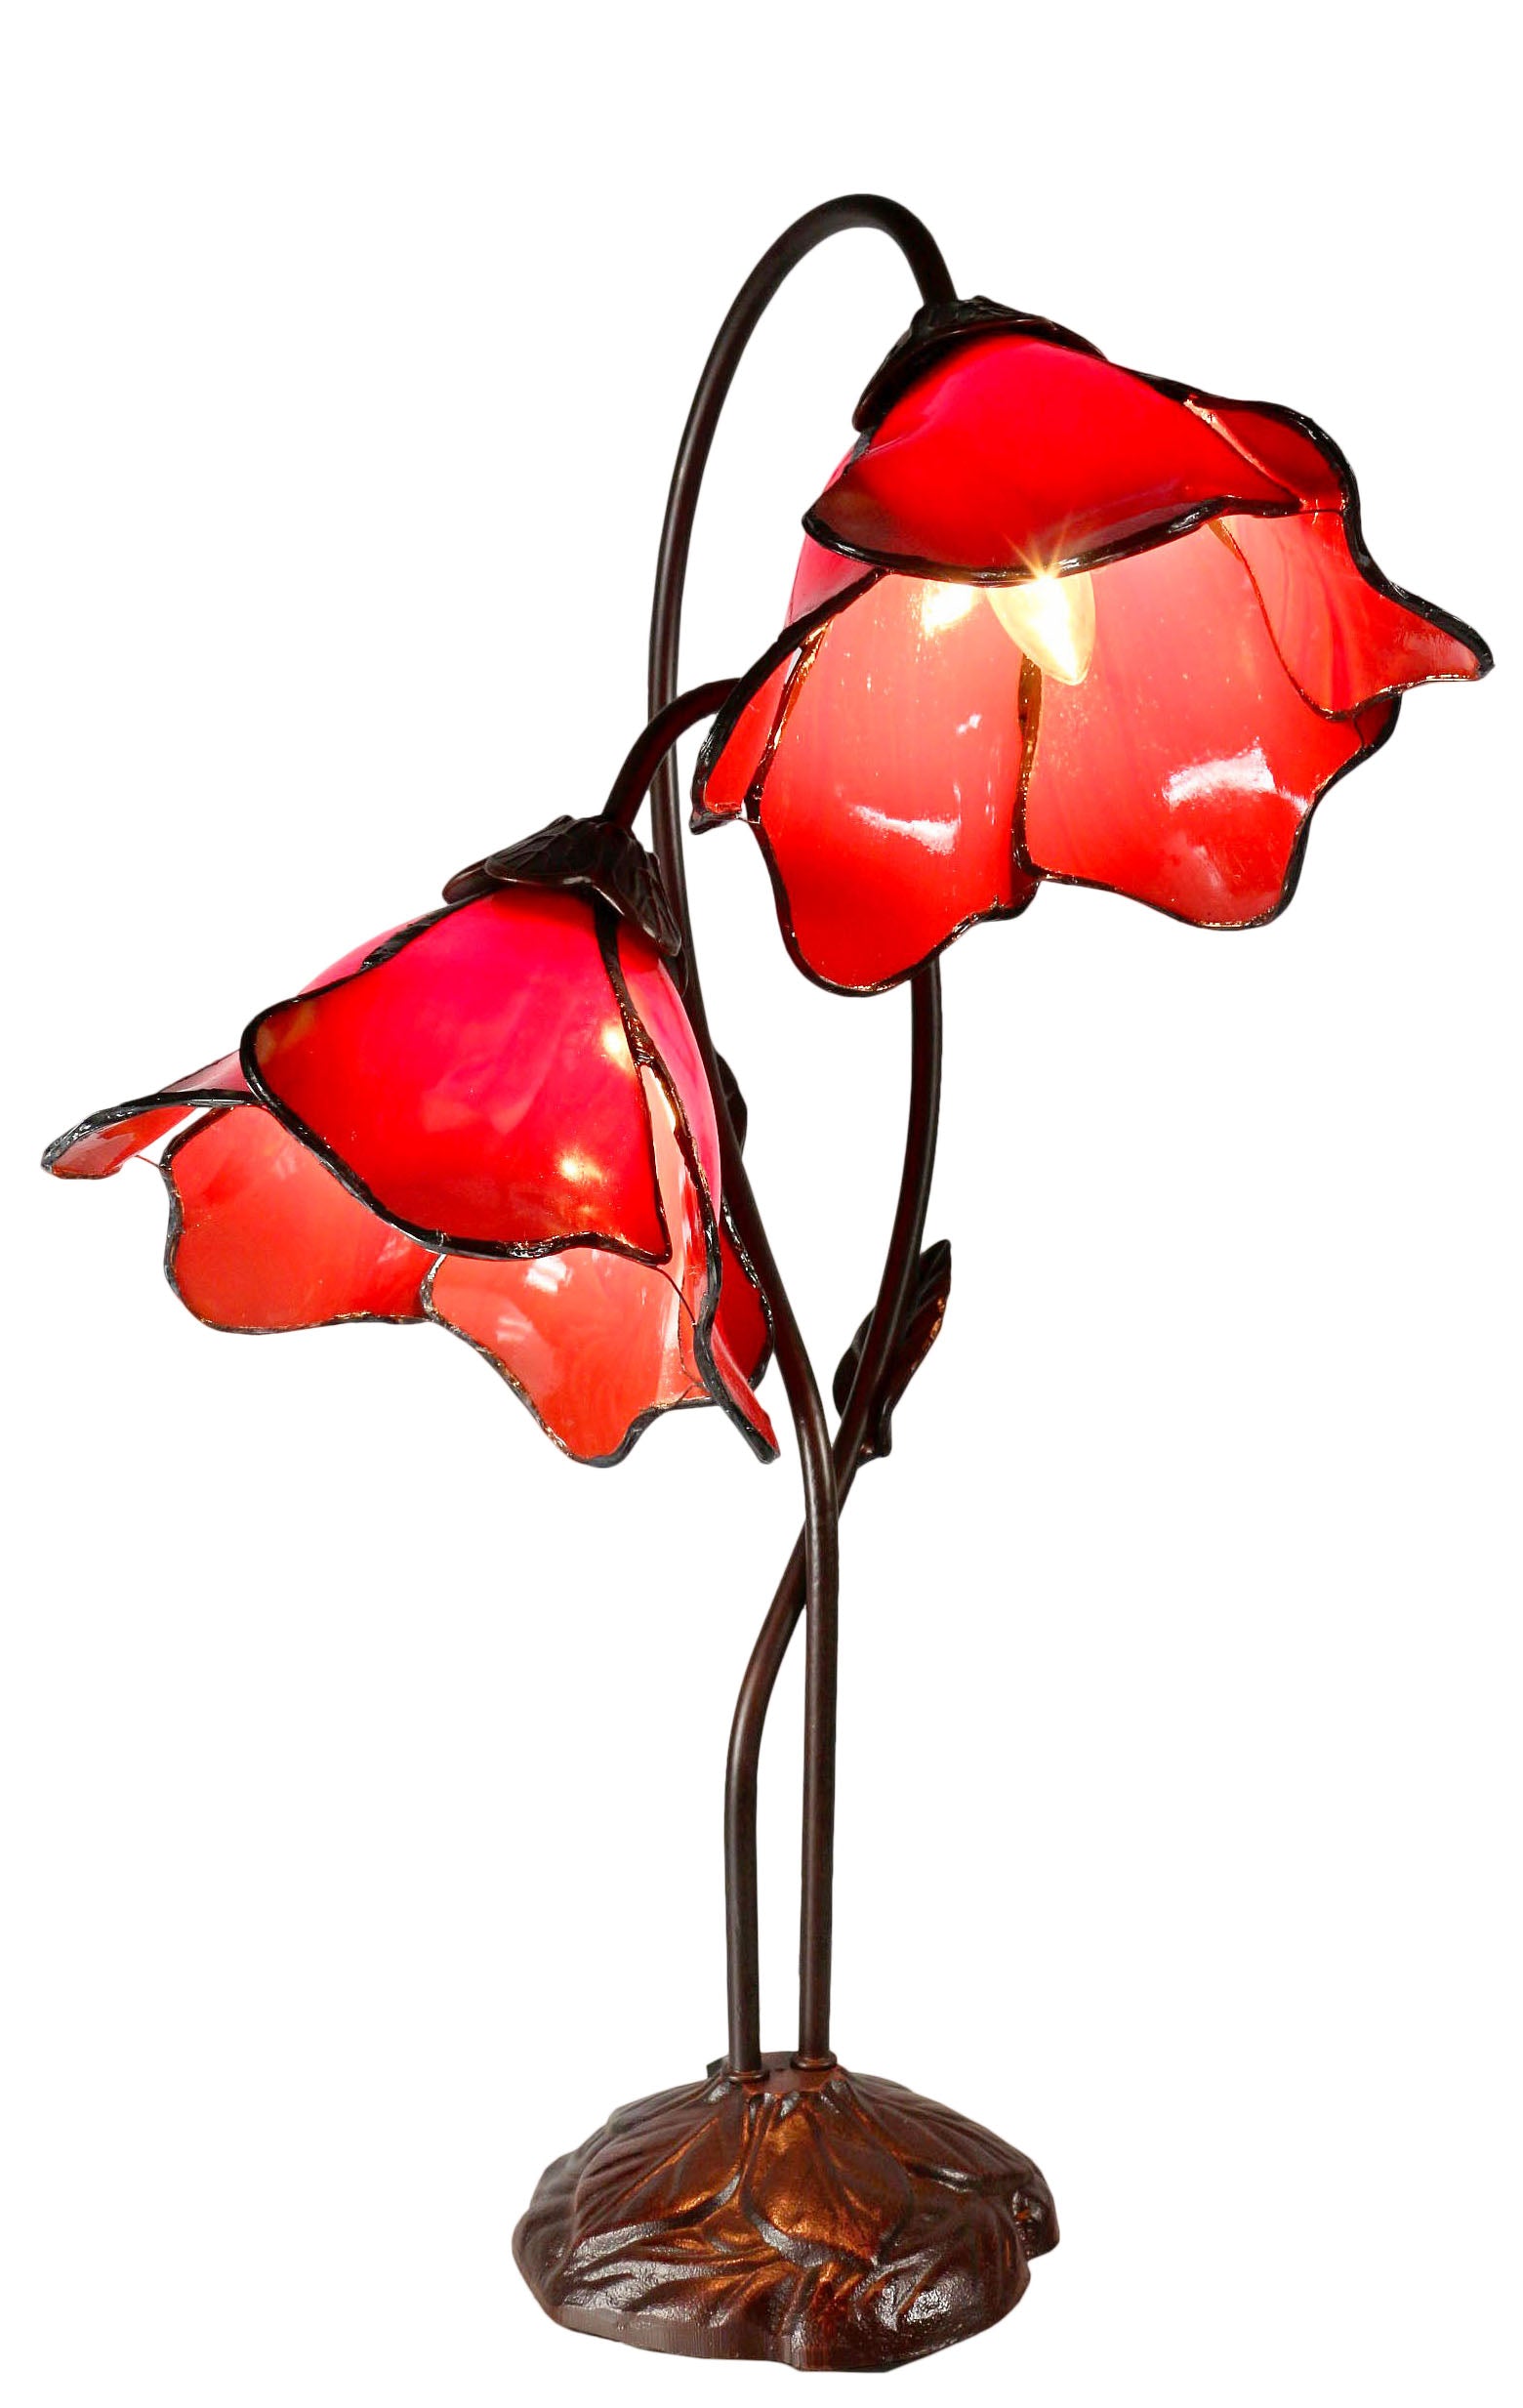 Double Lamp shade Flower  Water Lily Style Tiffany Table Lamp*Red